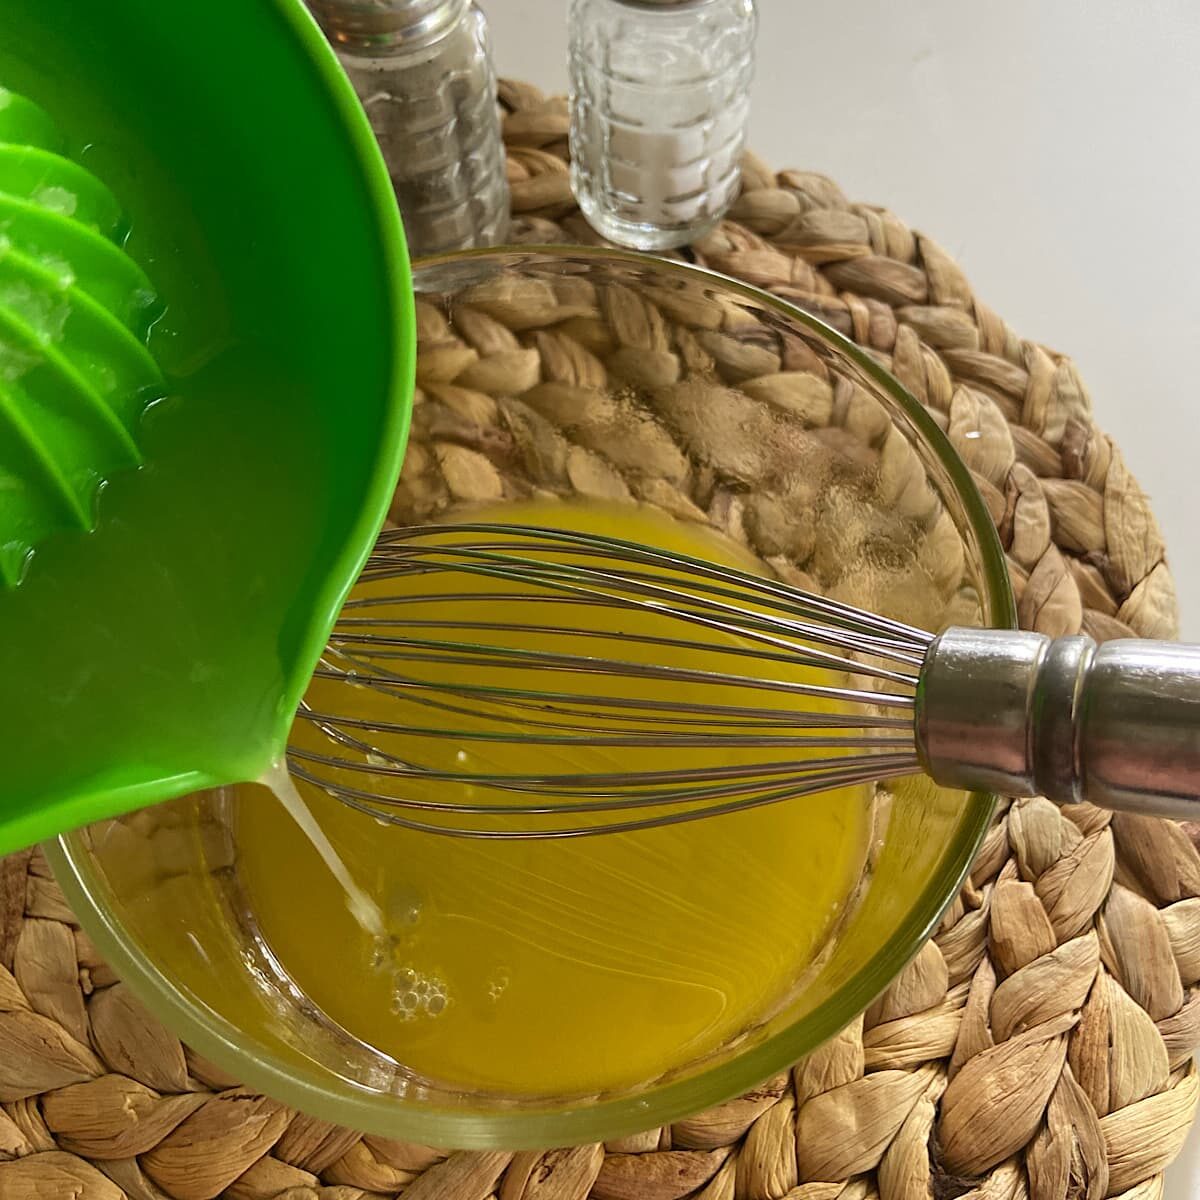 whisk lime juice into vinegar and oil